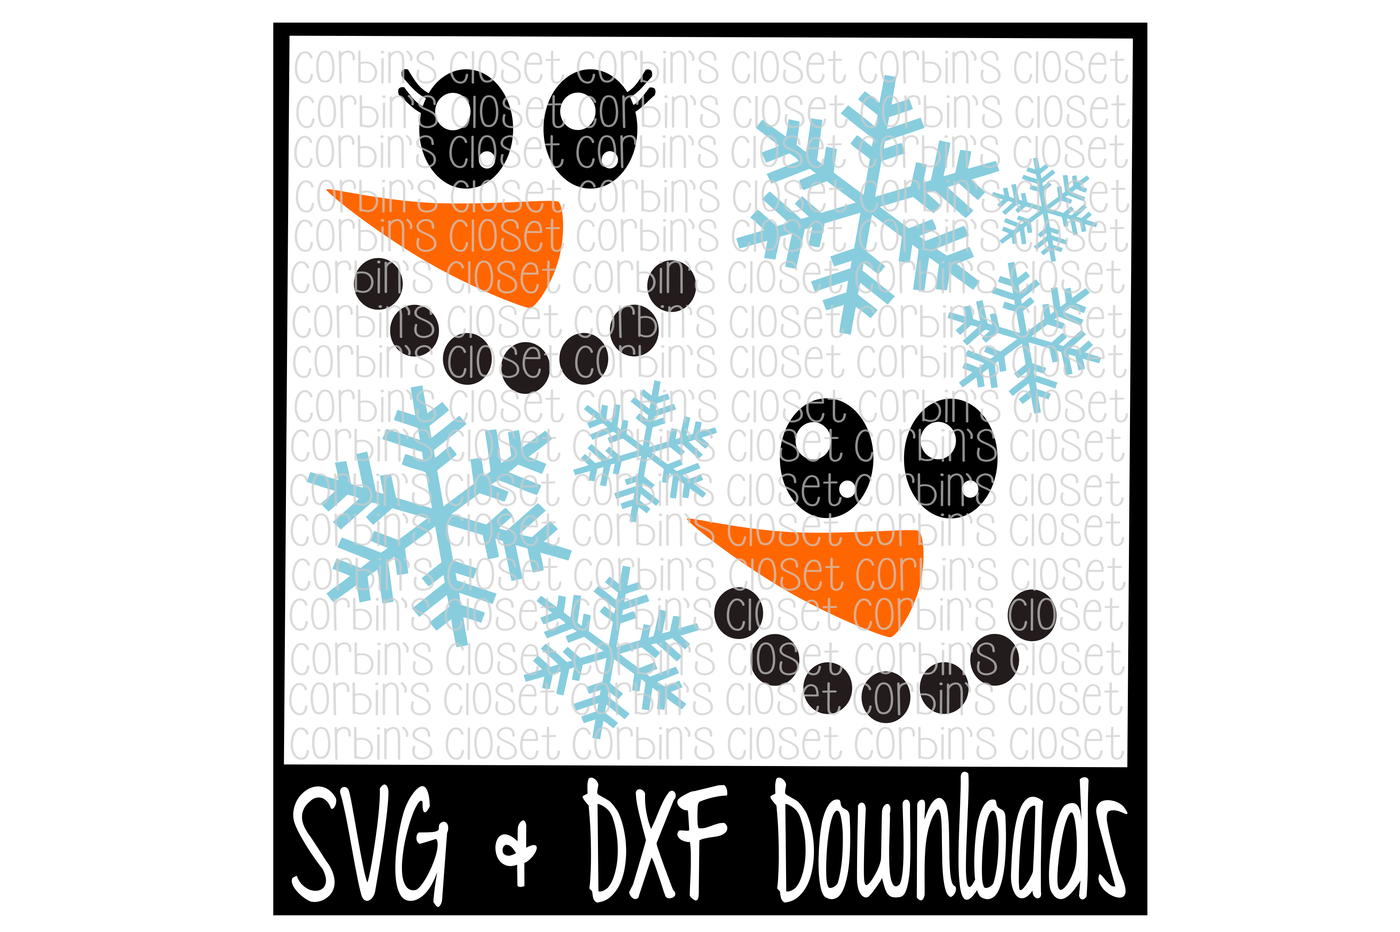 Snowman Snowgirl Snowflakes Cutting File By Corbins Svg Thehungryjpeg